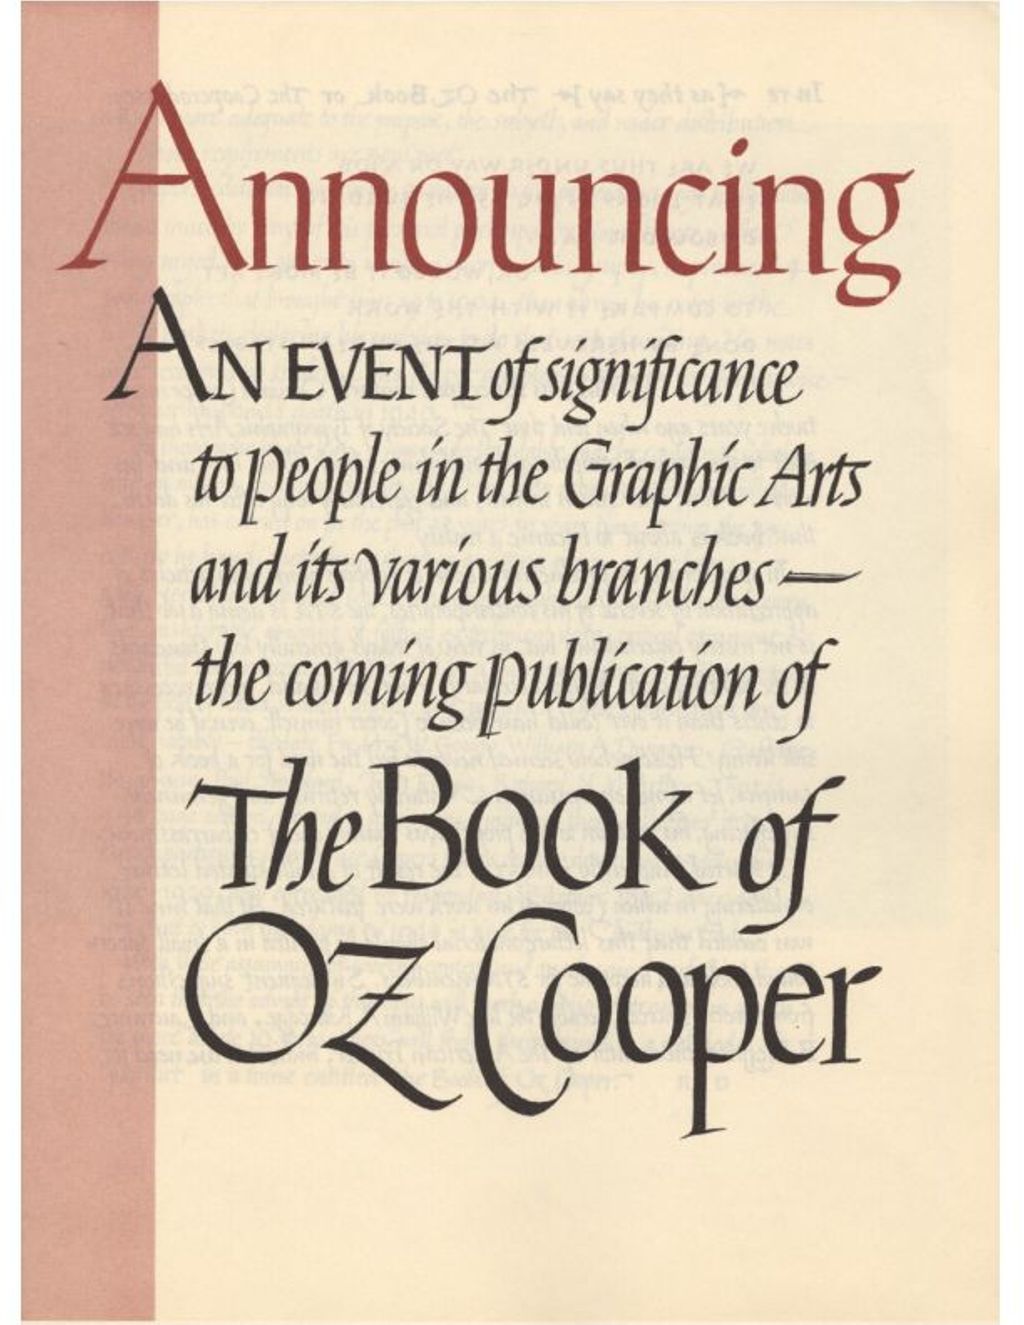 Miniature of Announcement of the Publication of the Book of Oz Cooper